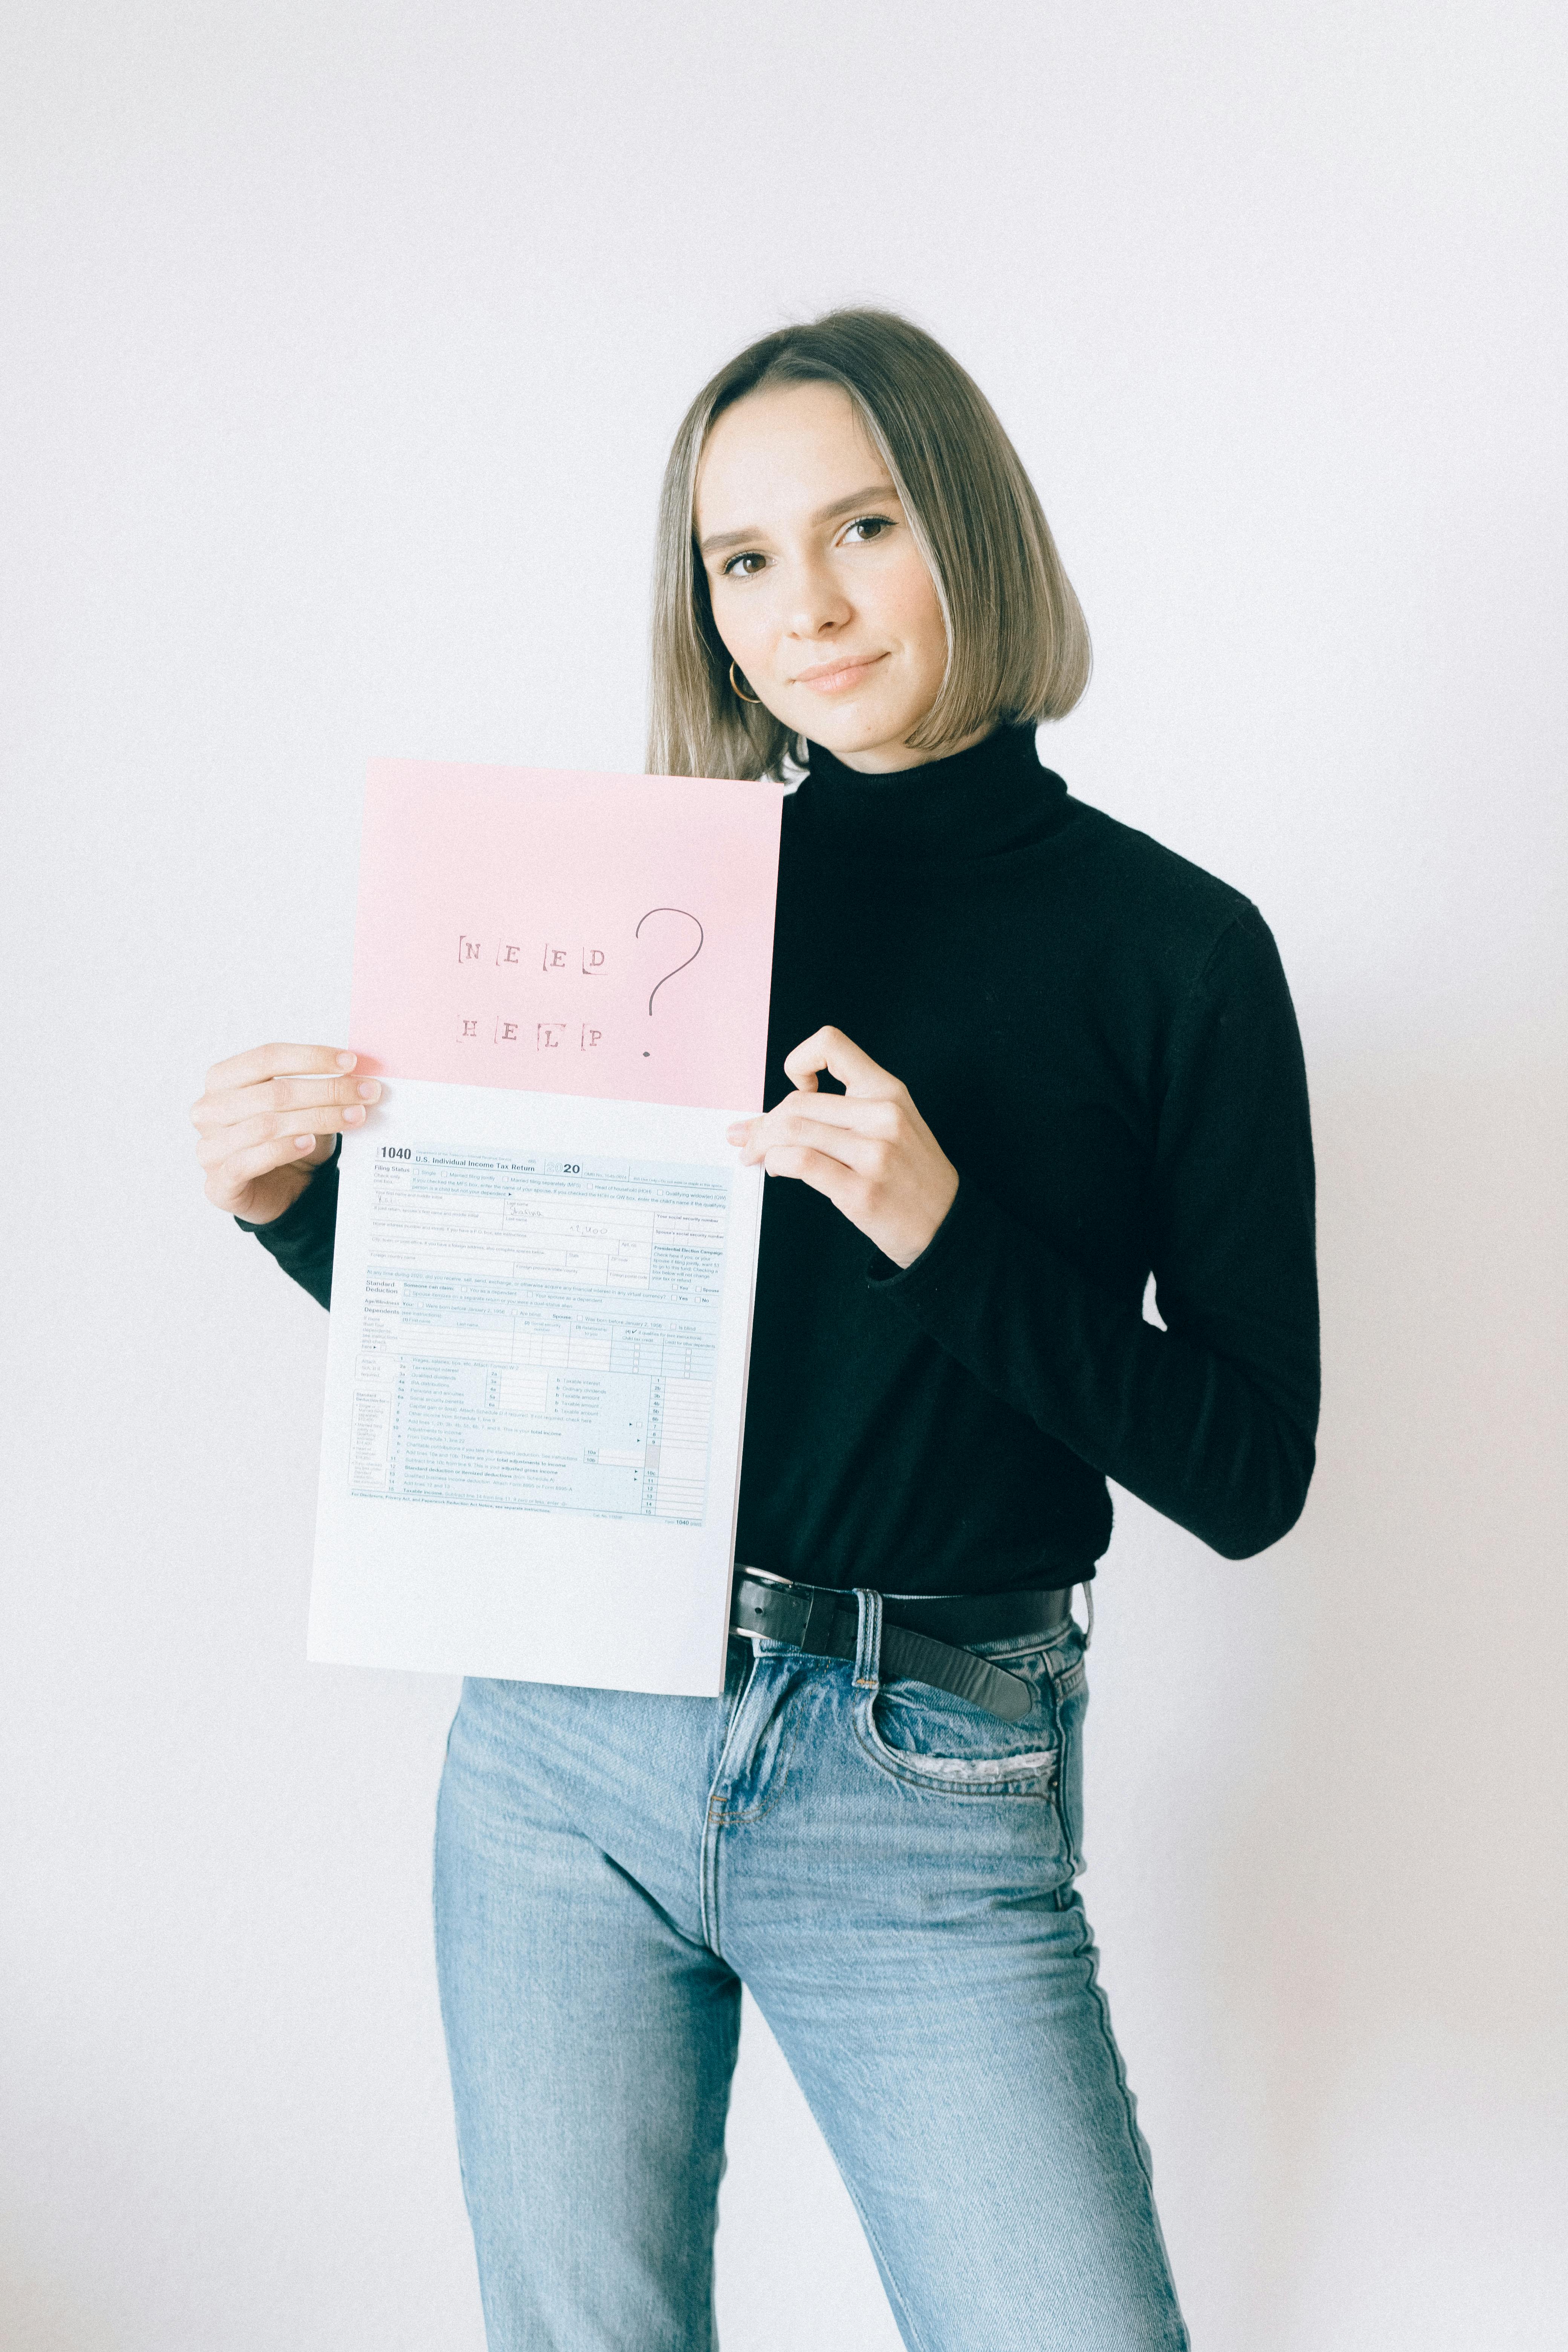 woman in black long sleeve turtleneck shirt holding tax forms and offering help